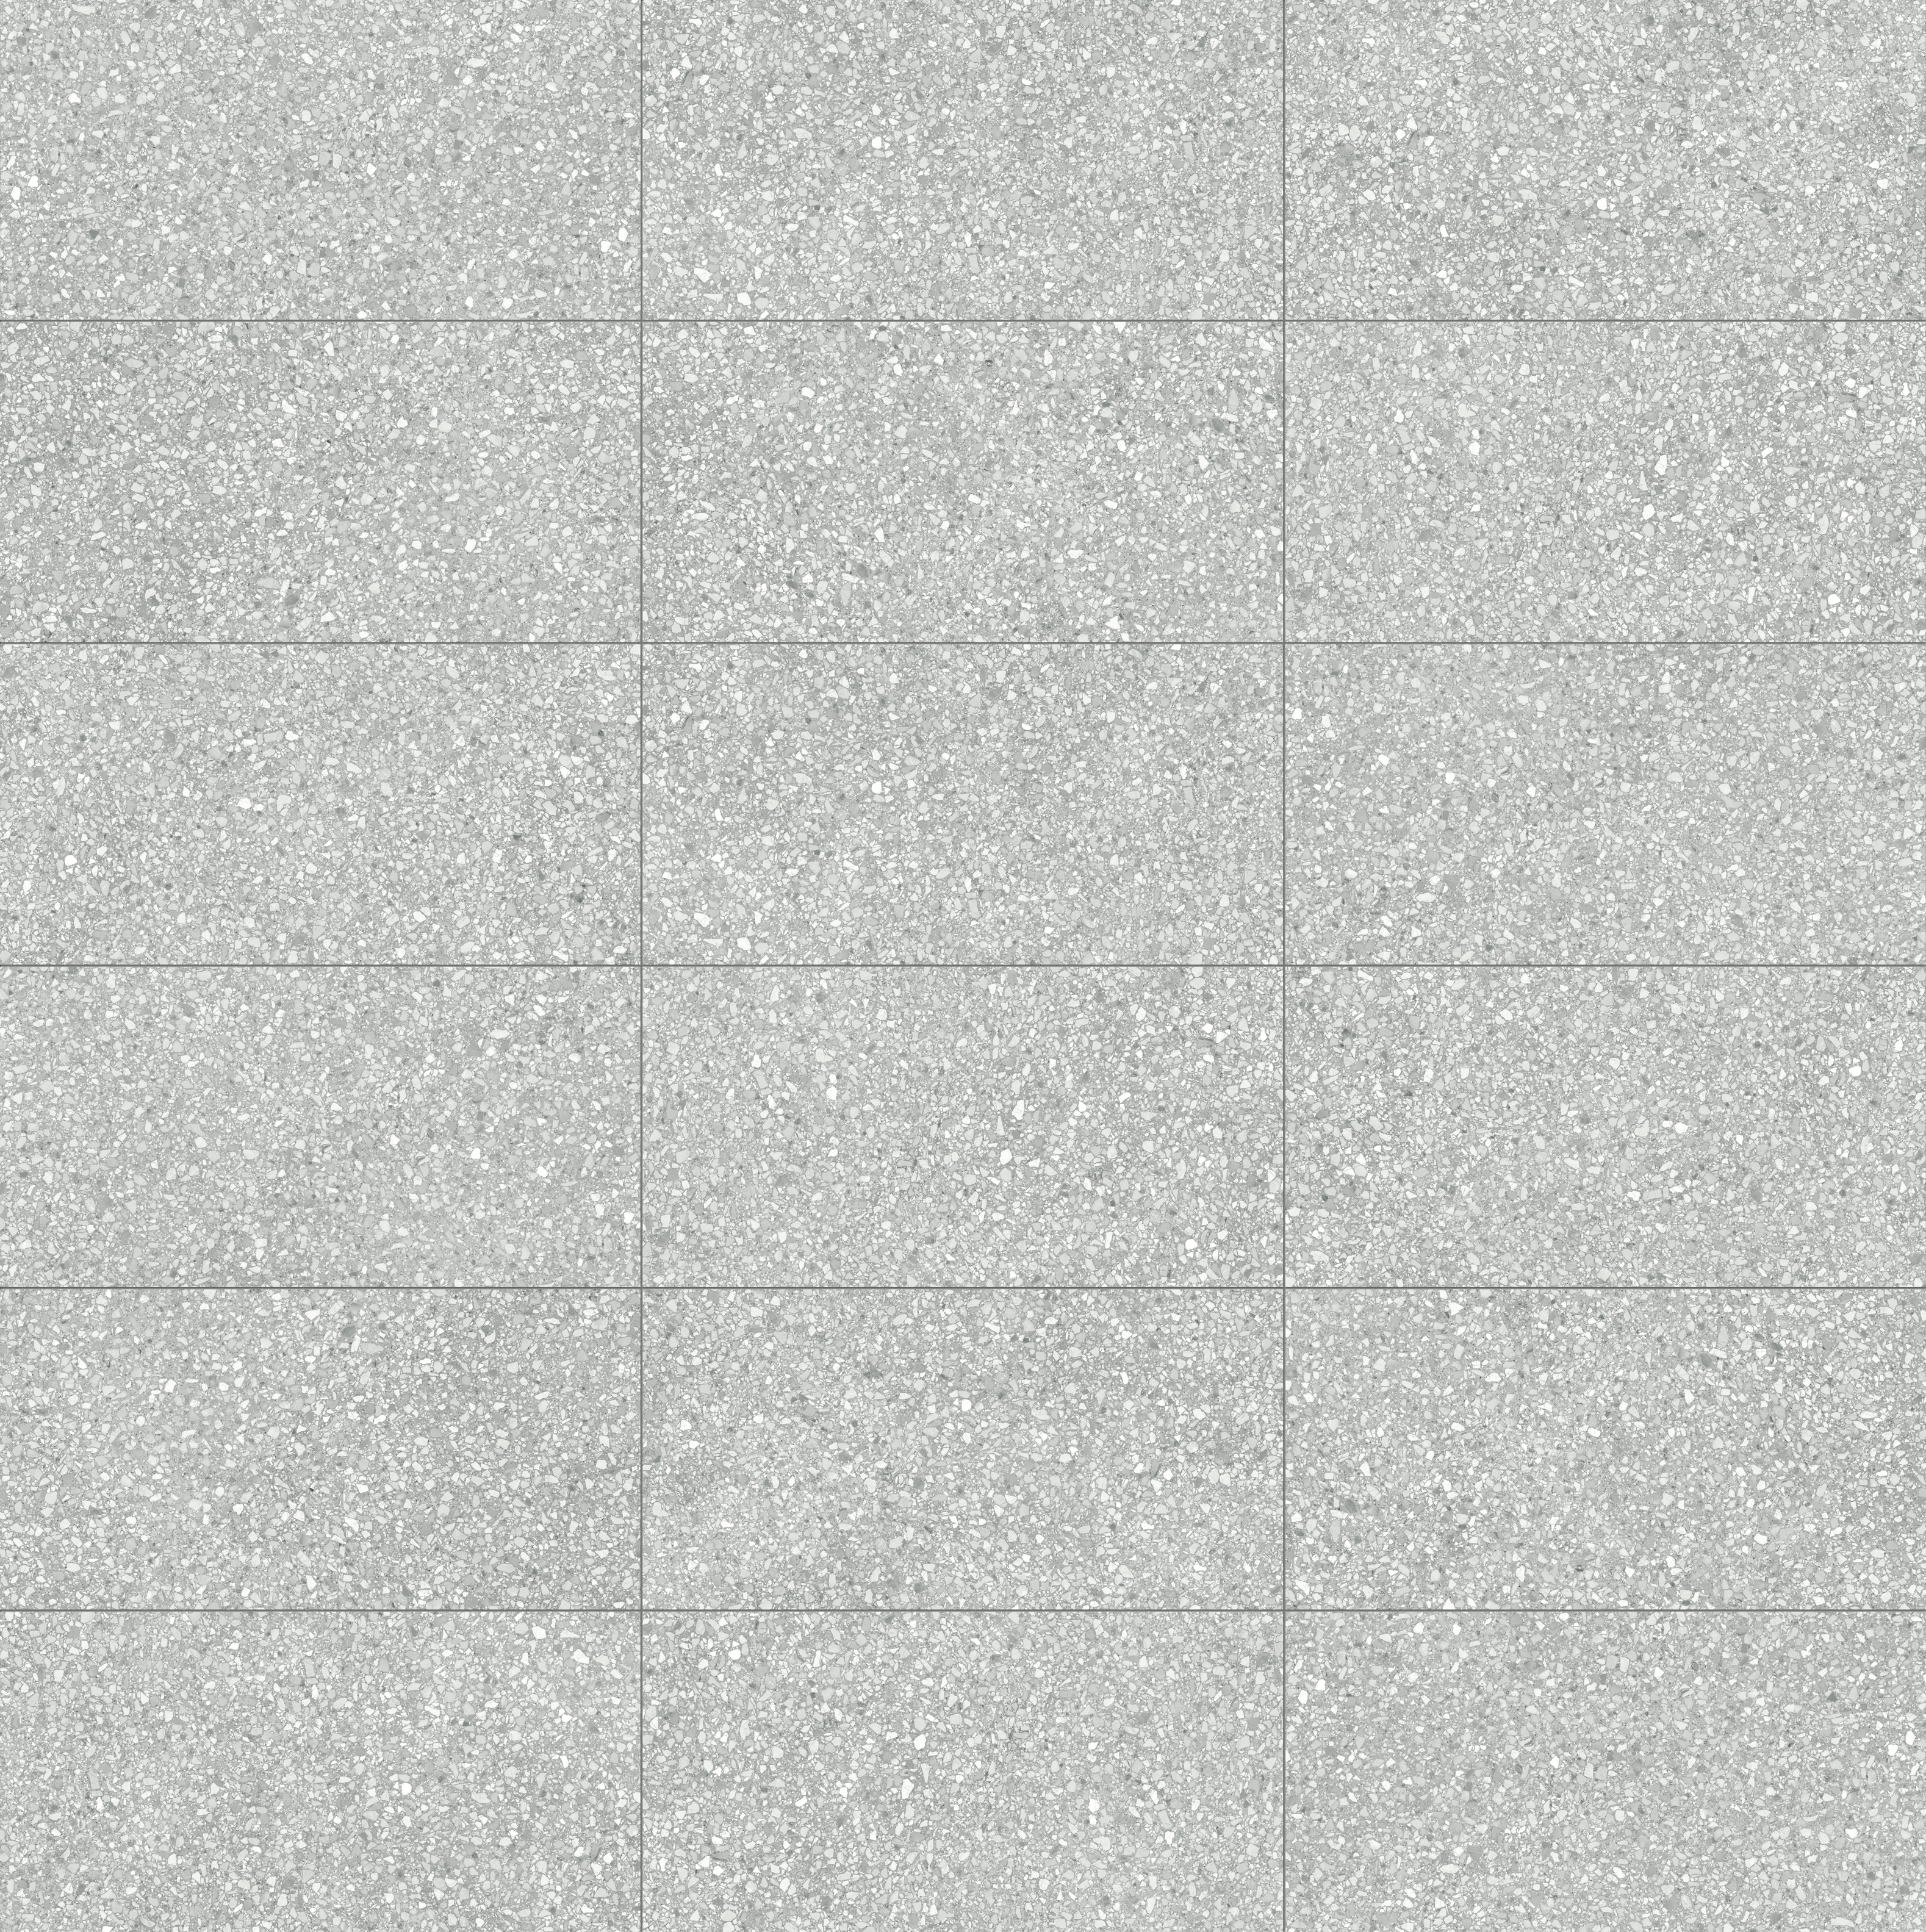 ash pattern color body porcelain field tile from station anatolia collection distributed by surface group international matte finish rectified edge 12x24 rectangle shape